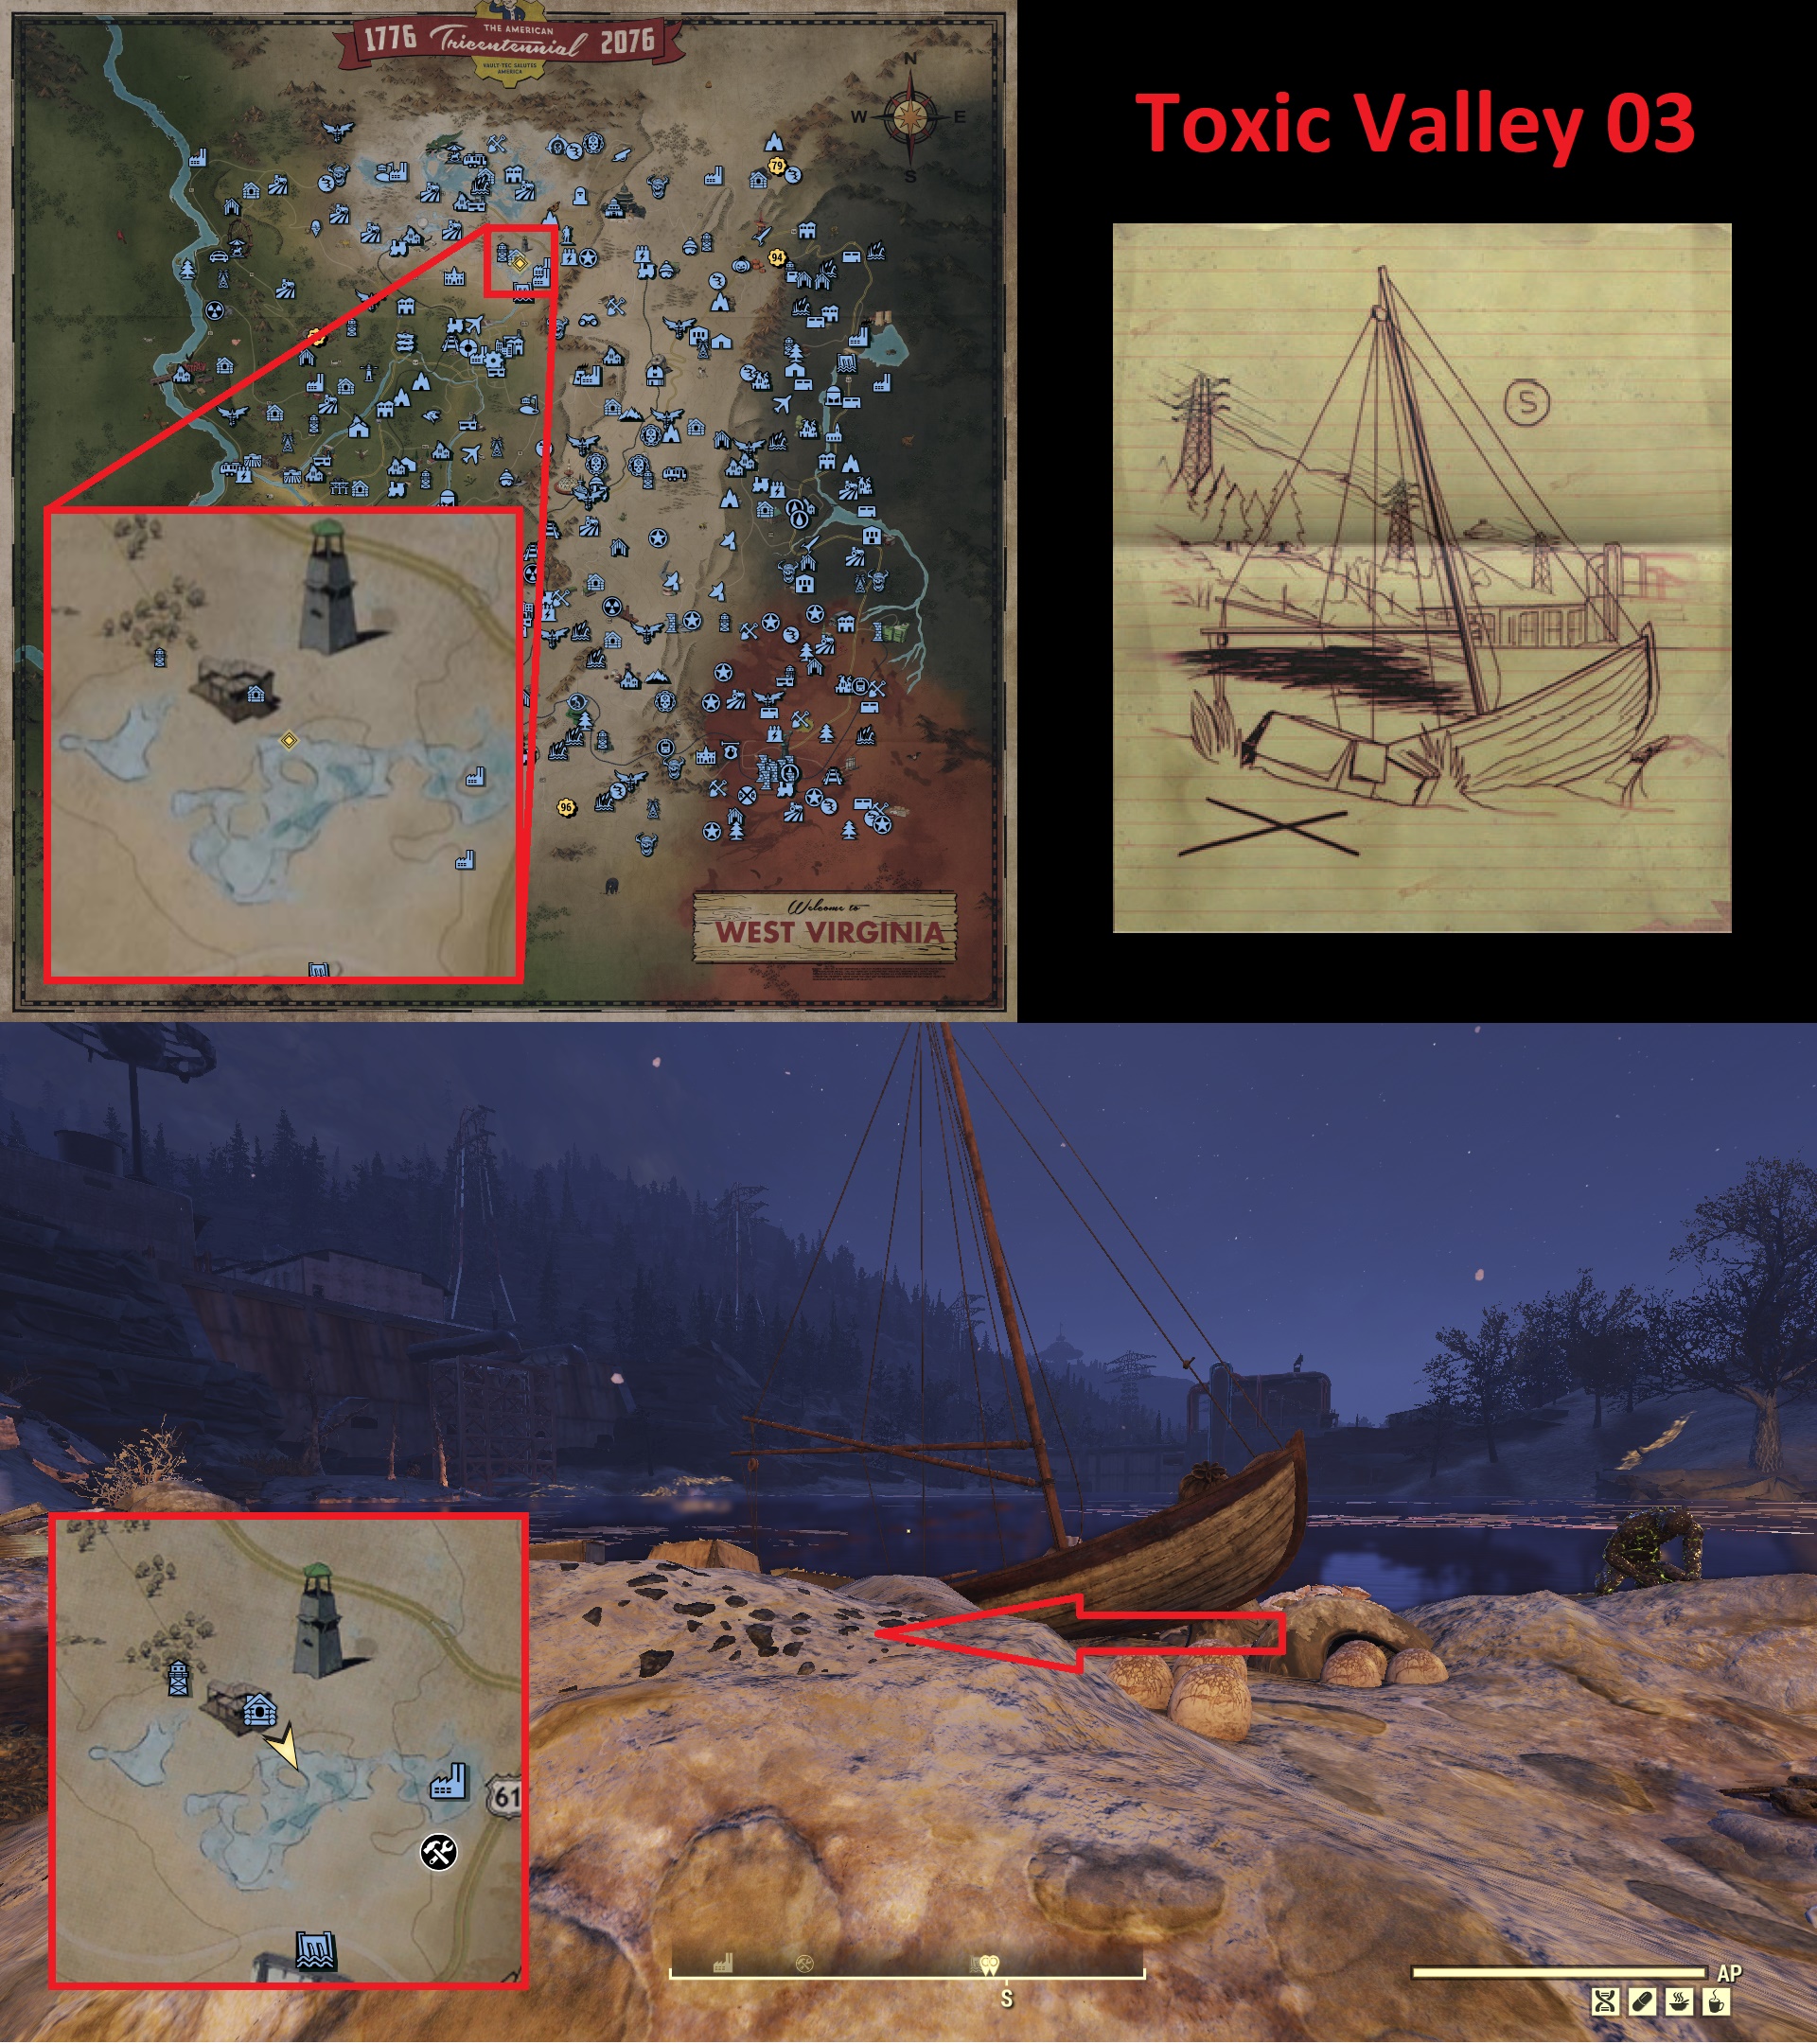 Fallout 76 Treasure Map Locations - Toxic Valley 03 - 6808F33